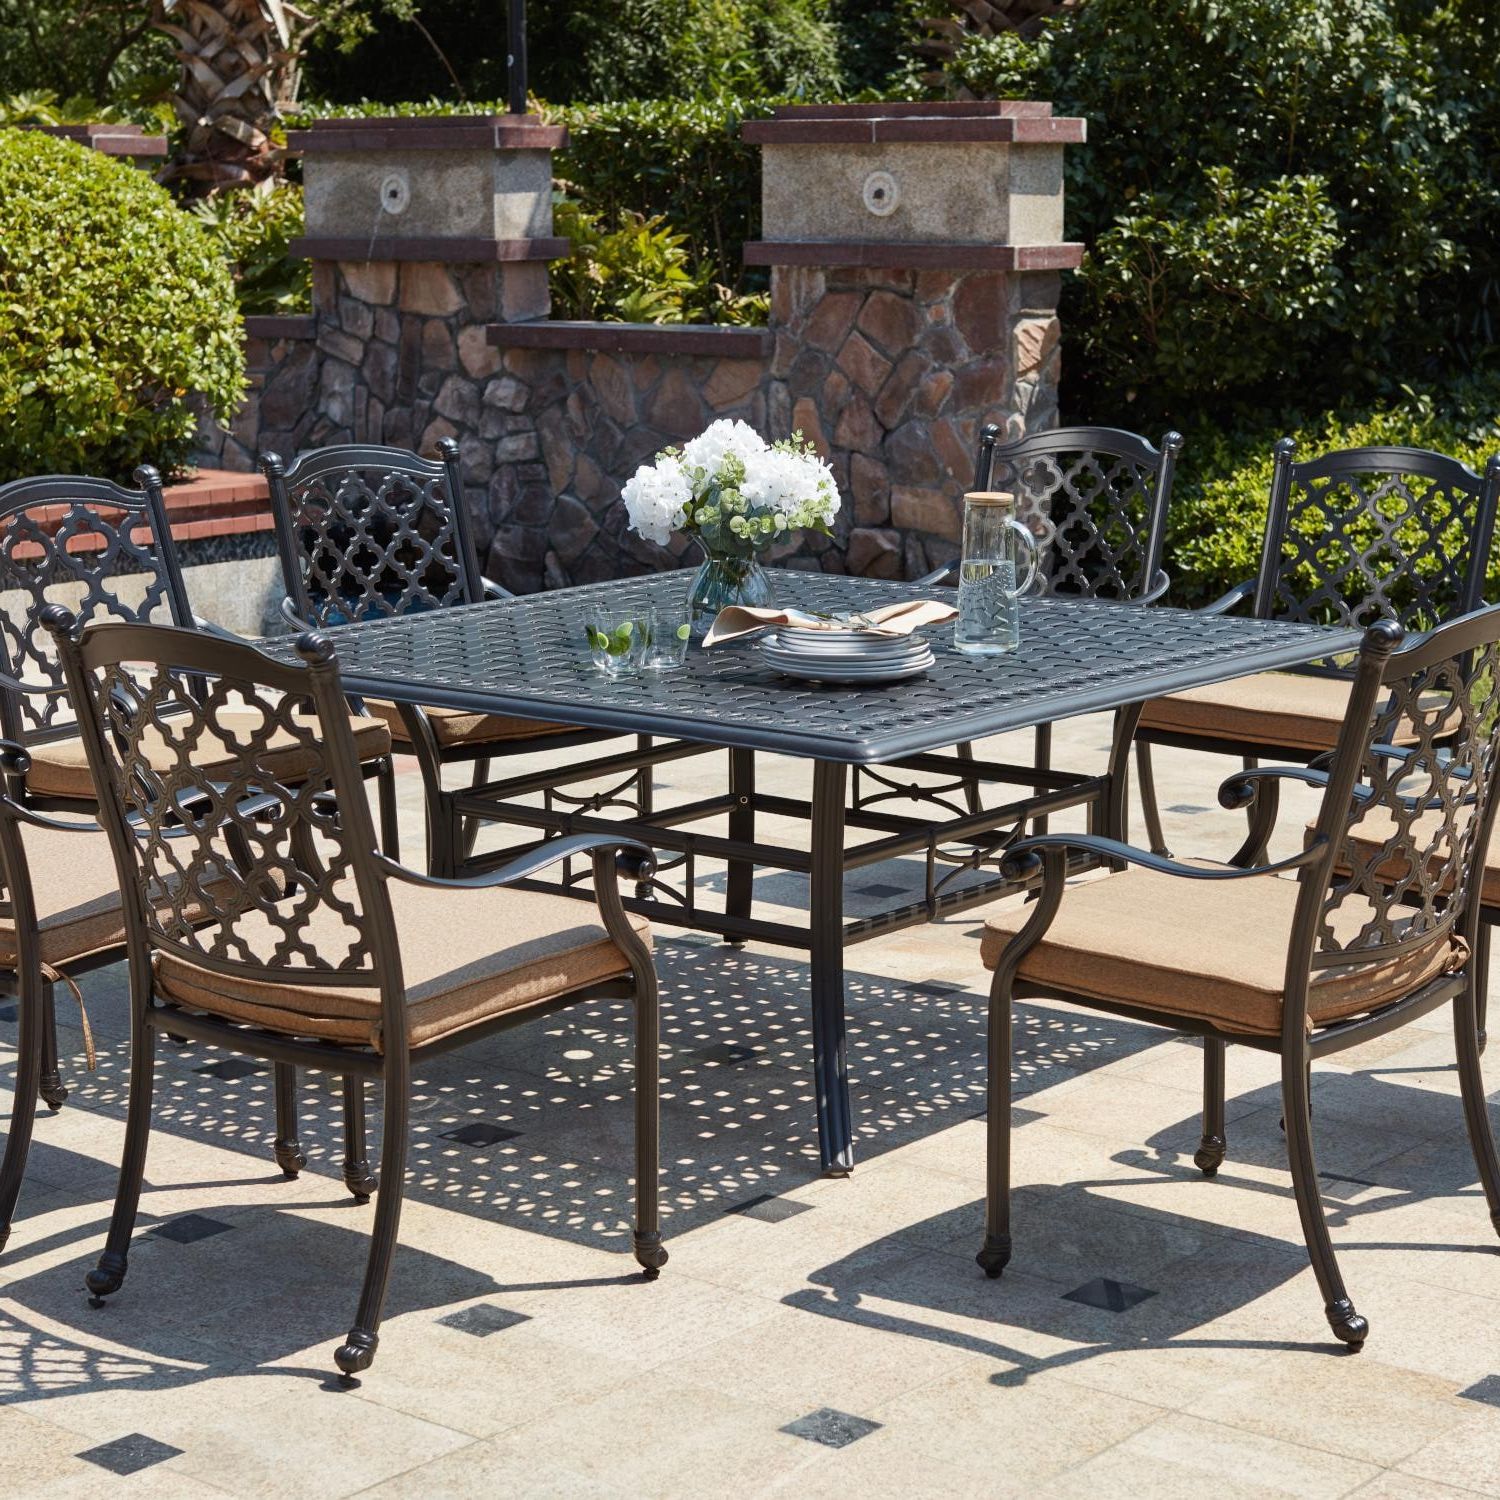 Widely Used 9 Piece Patio Dining Sets Throughout Madison 9 Piece Cast Aluminum Patio Dining Set W/ 60 Inch Square Table (View 4 of 15)